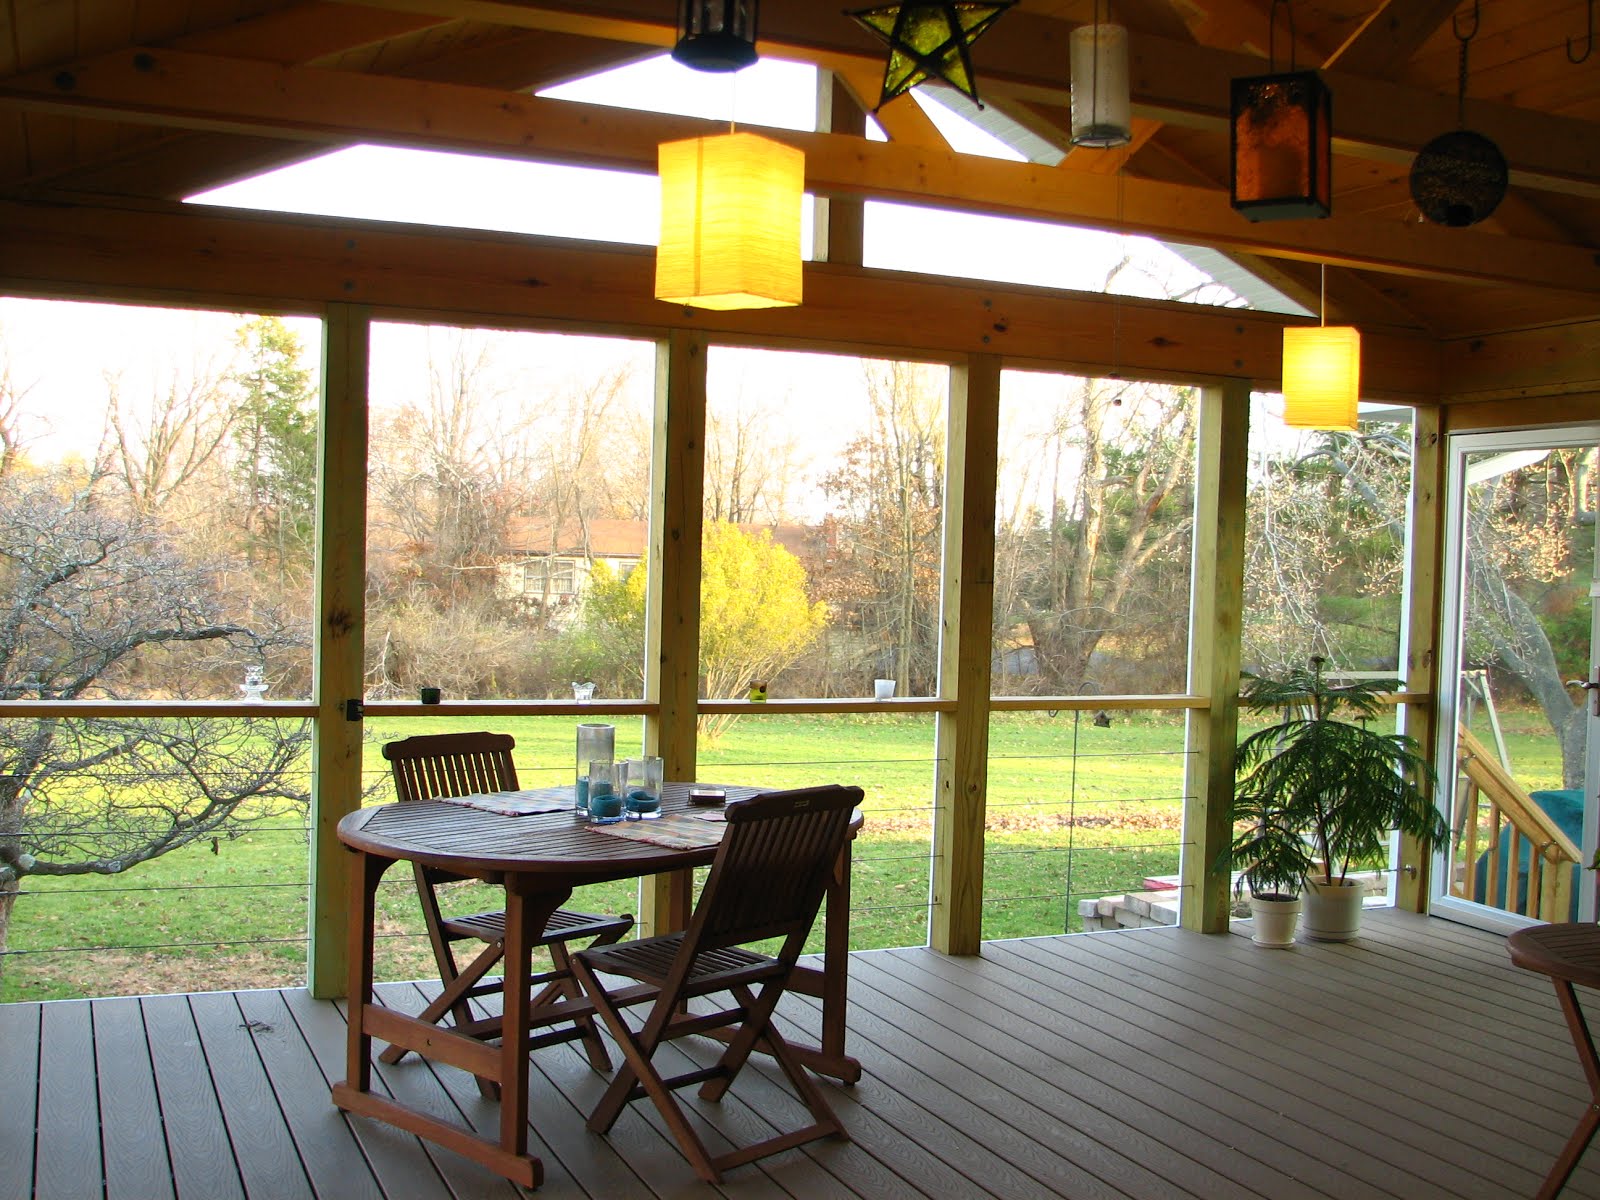 King Truss Screened Porch